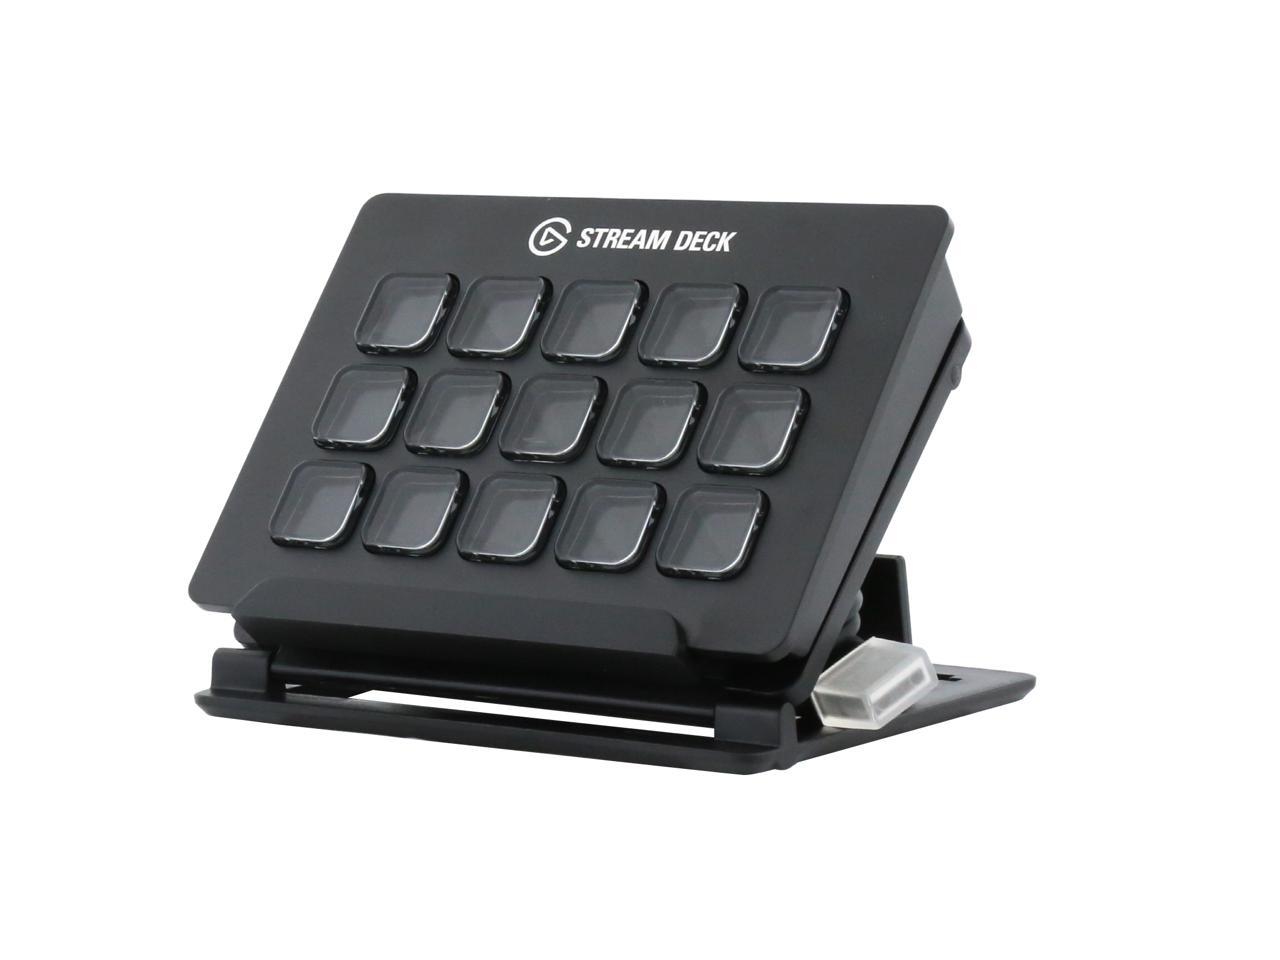 PC/タブレット PC周辺機器 Elgato Stream Deck - Live Content Creation Controller with 15 Customizable  LCD Keys, Adjustable Stand, for Windows 10 and macOS 10.11 or Later